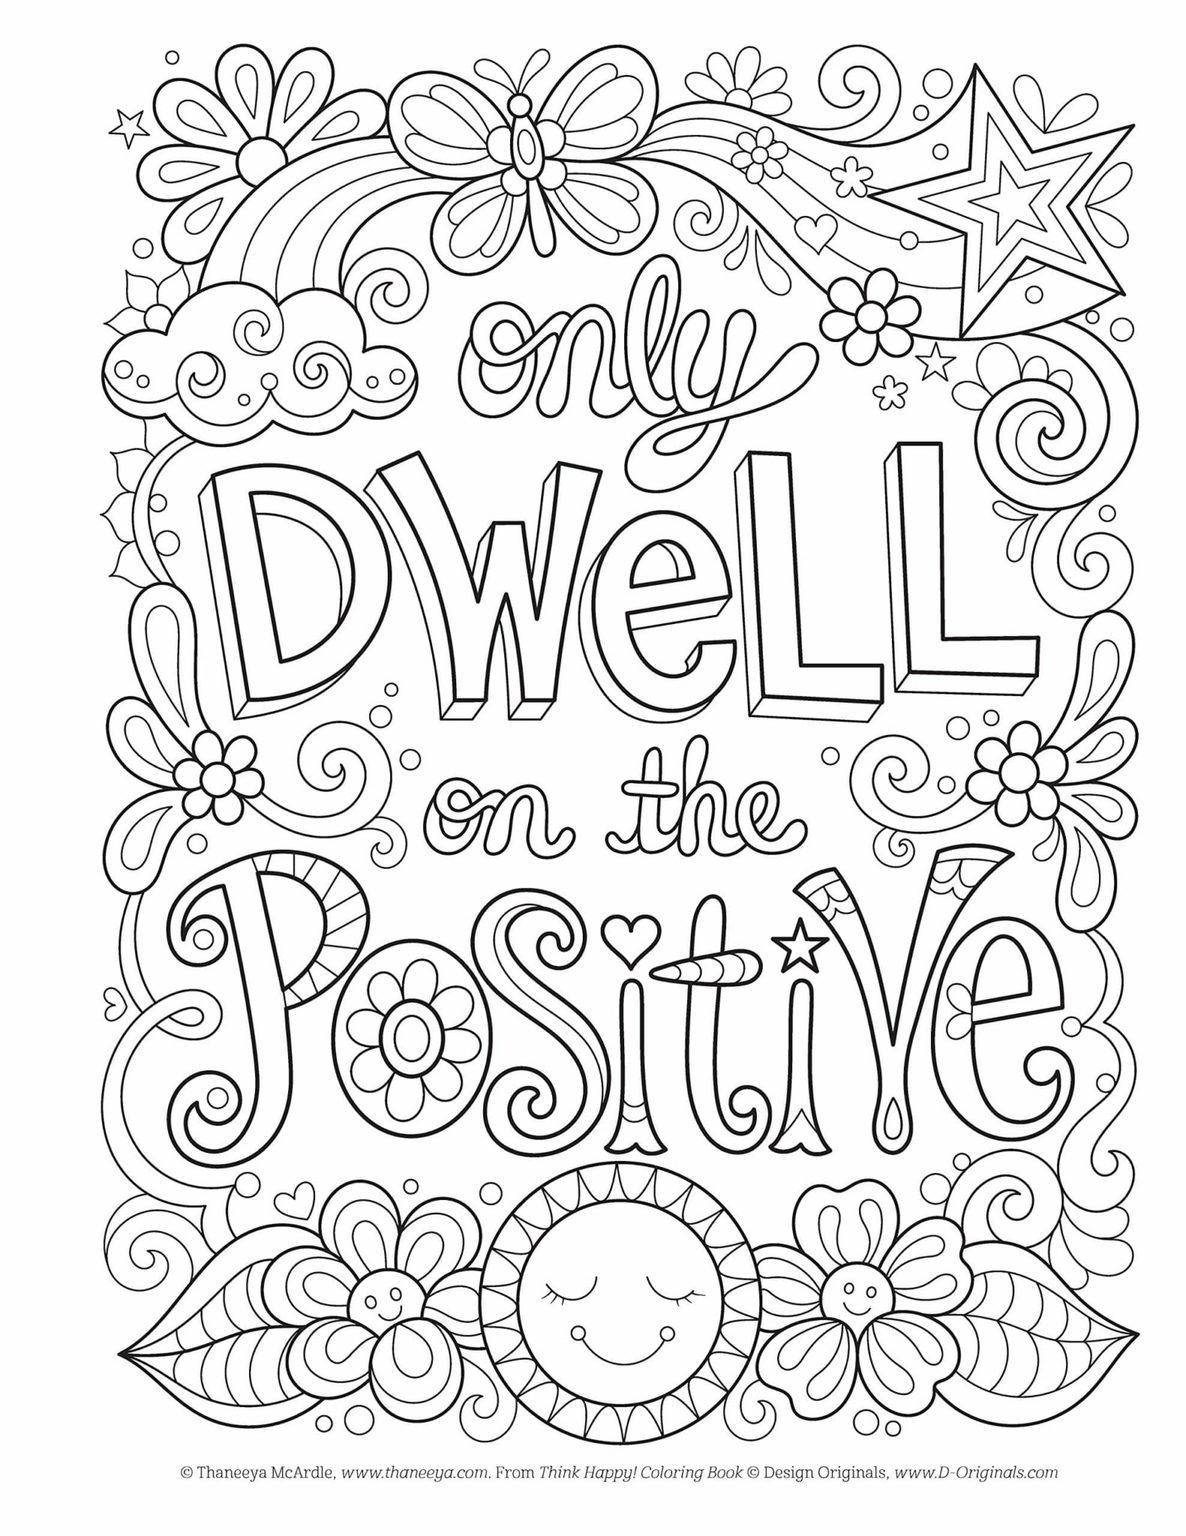 Free Printable Coloring Pages for Adults Only Easy - Russell Darriond